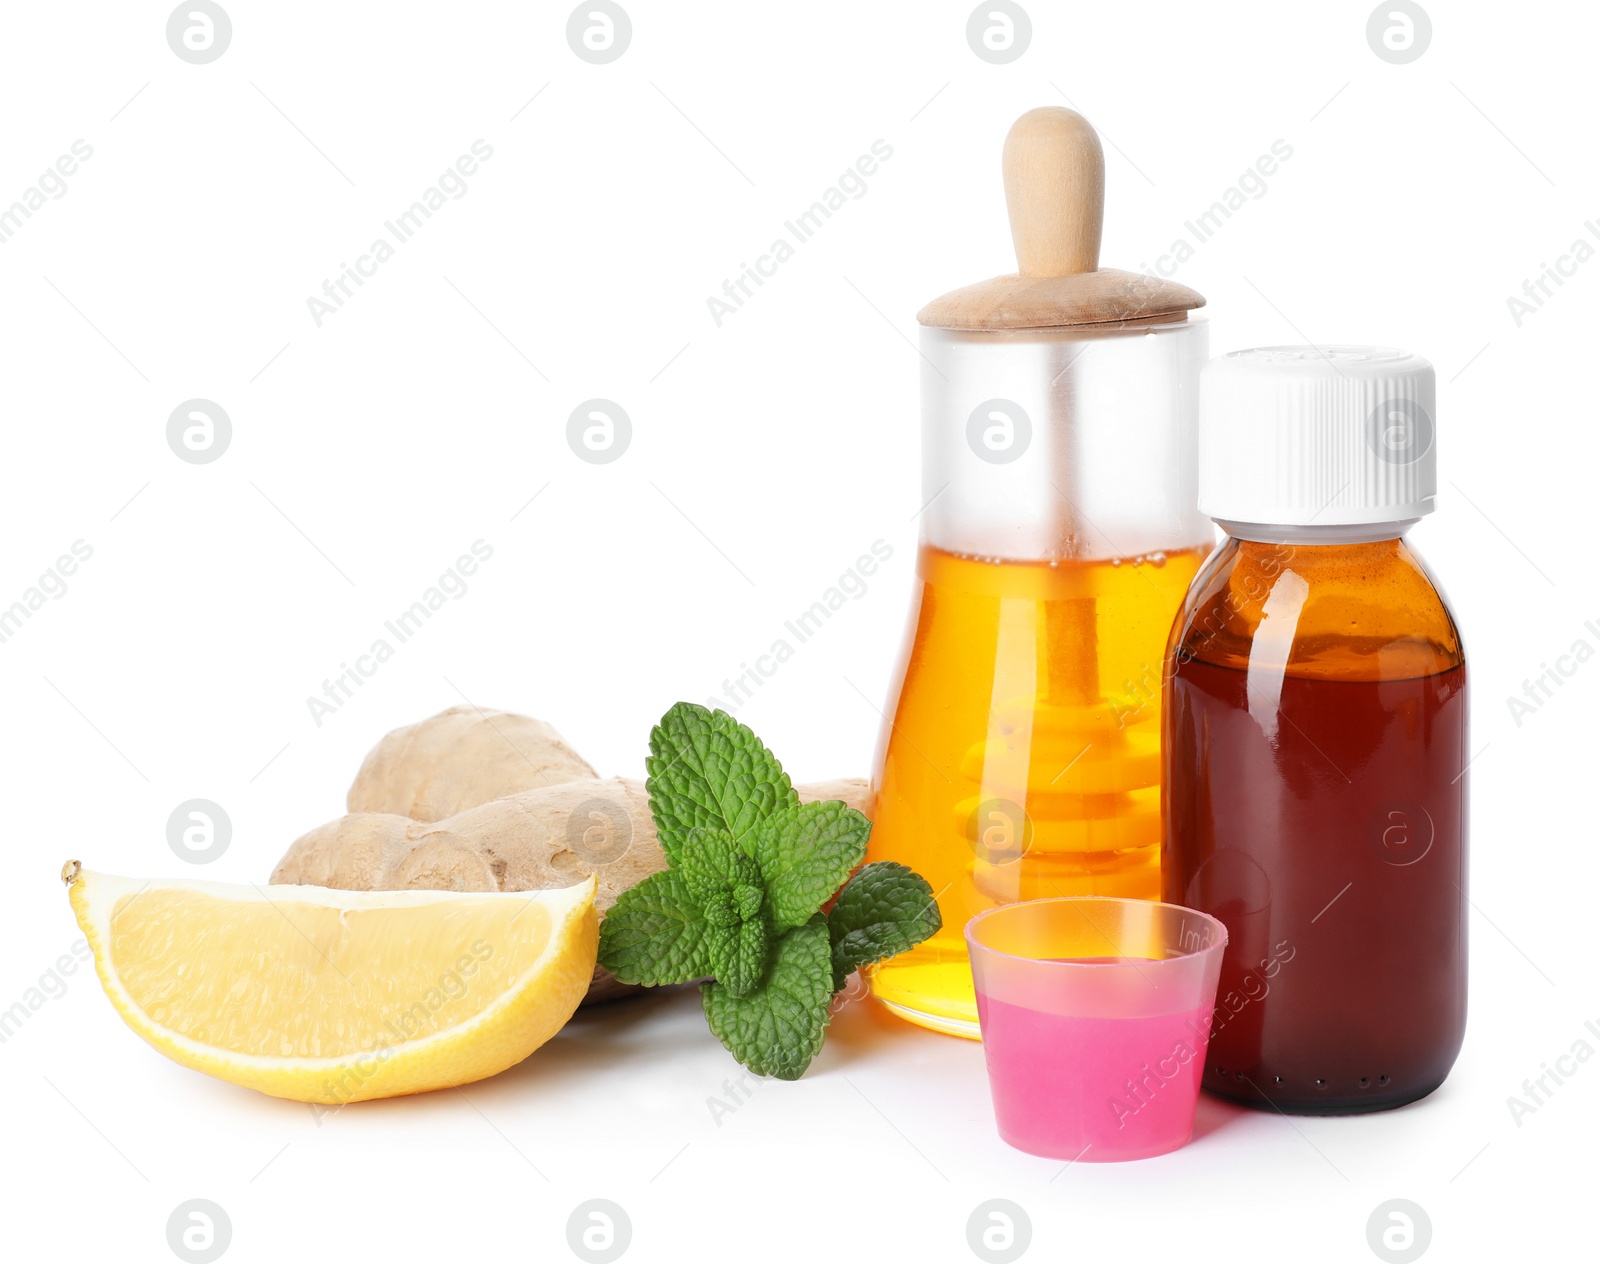 Photo of Jar with honey, mint, lemon, ginger and bottle of cough syrup on white background